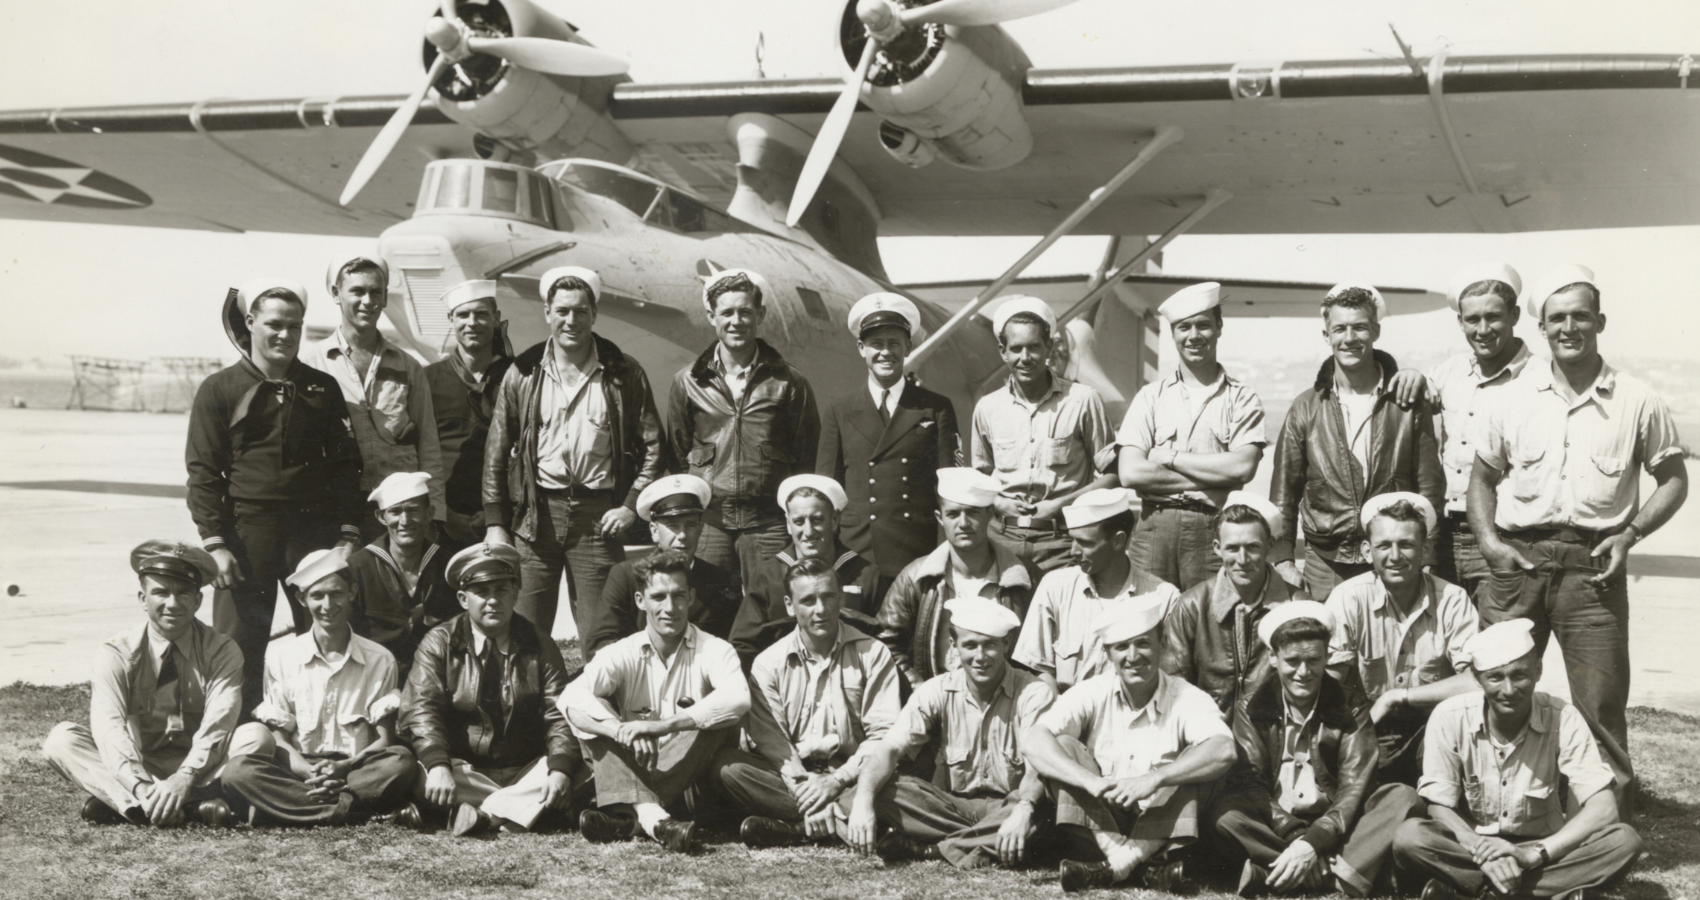 Black and white photograph of the crew of the PBY-5 Aircraft with Chief Aviation Pilot Ken Sederquist.